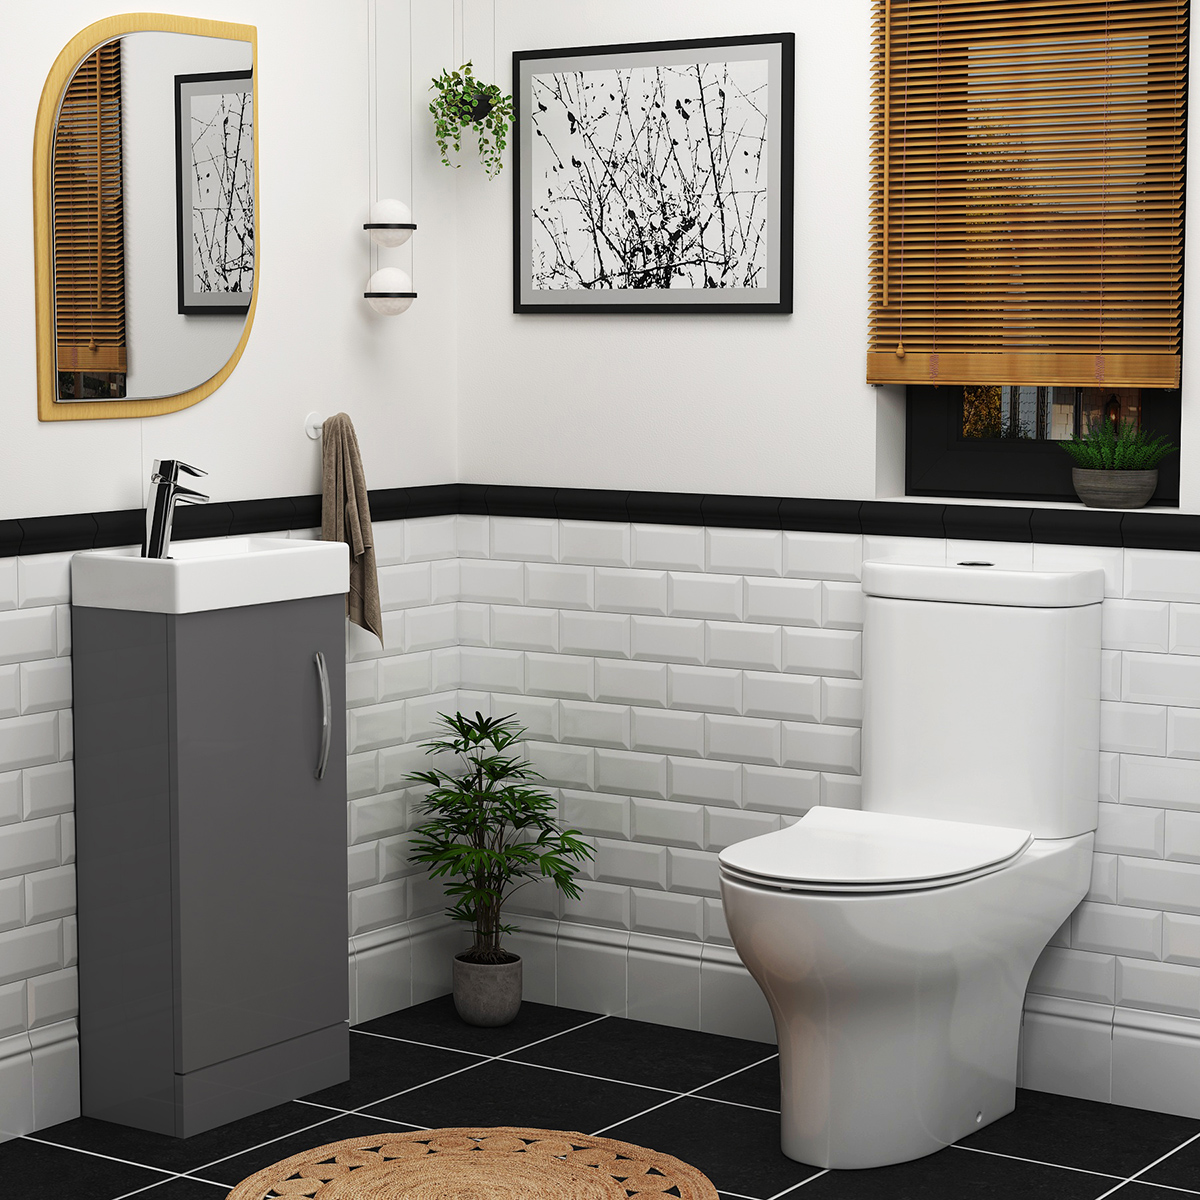  What adds up value to your home? A bathroom for sure